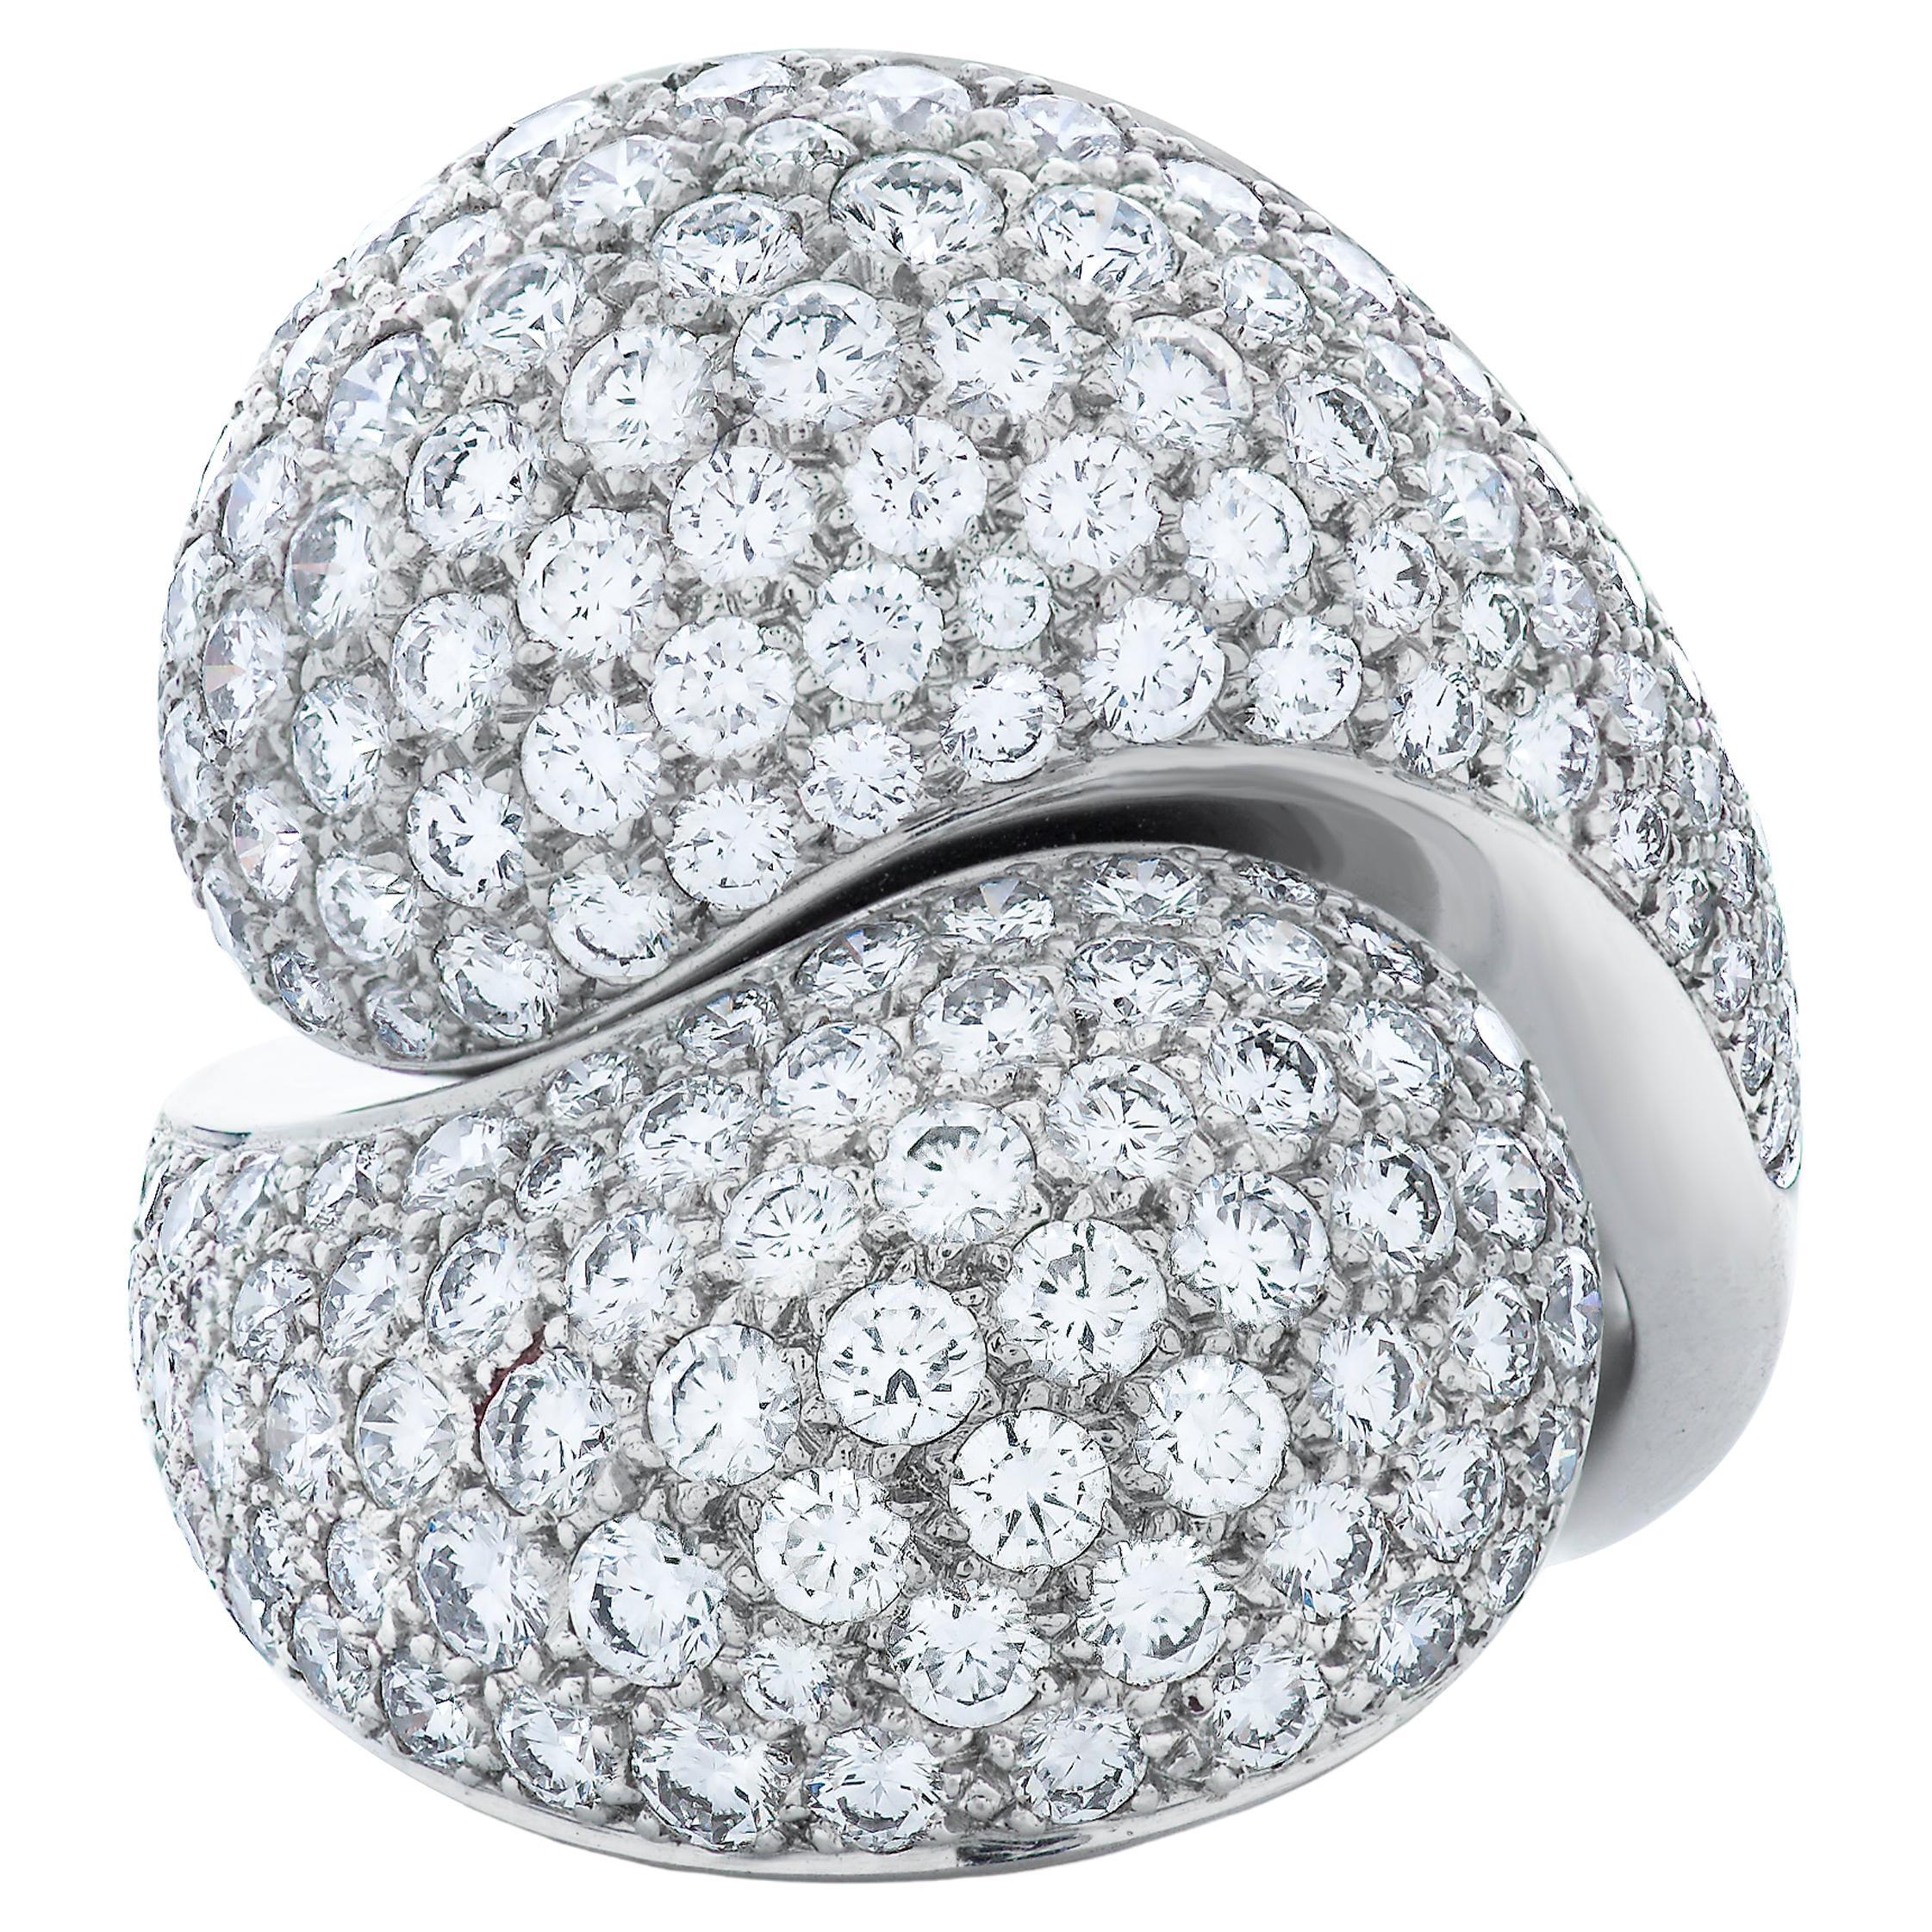 Cartier Pave Set Diamond Bypass Dome Ring in 18k White Gold